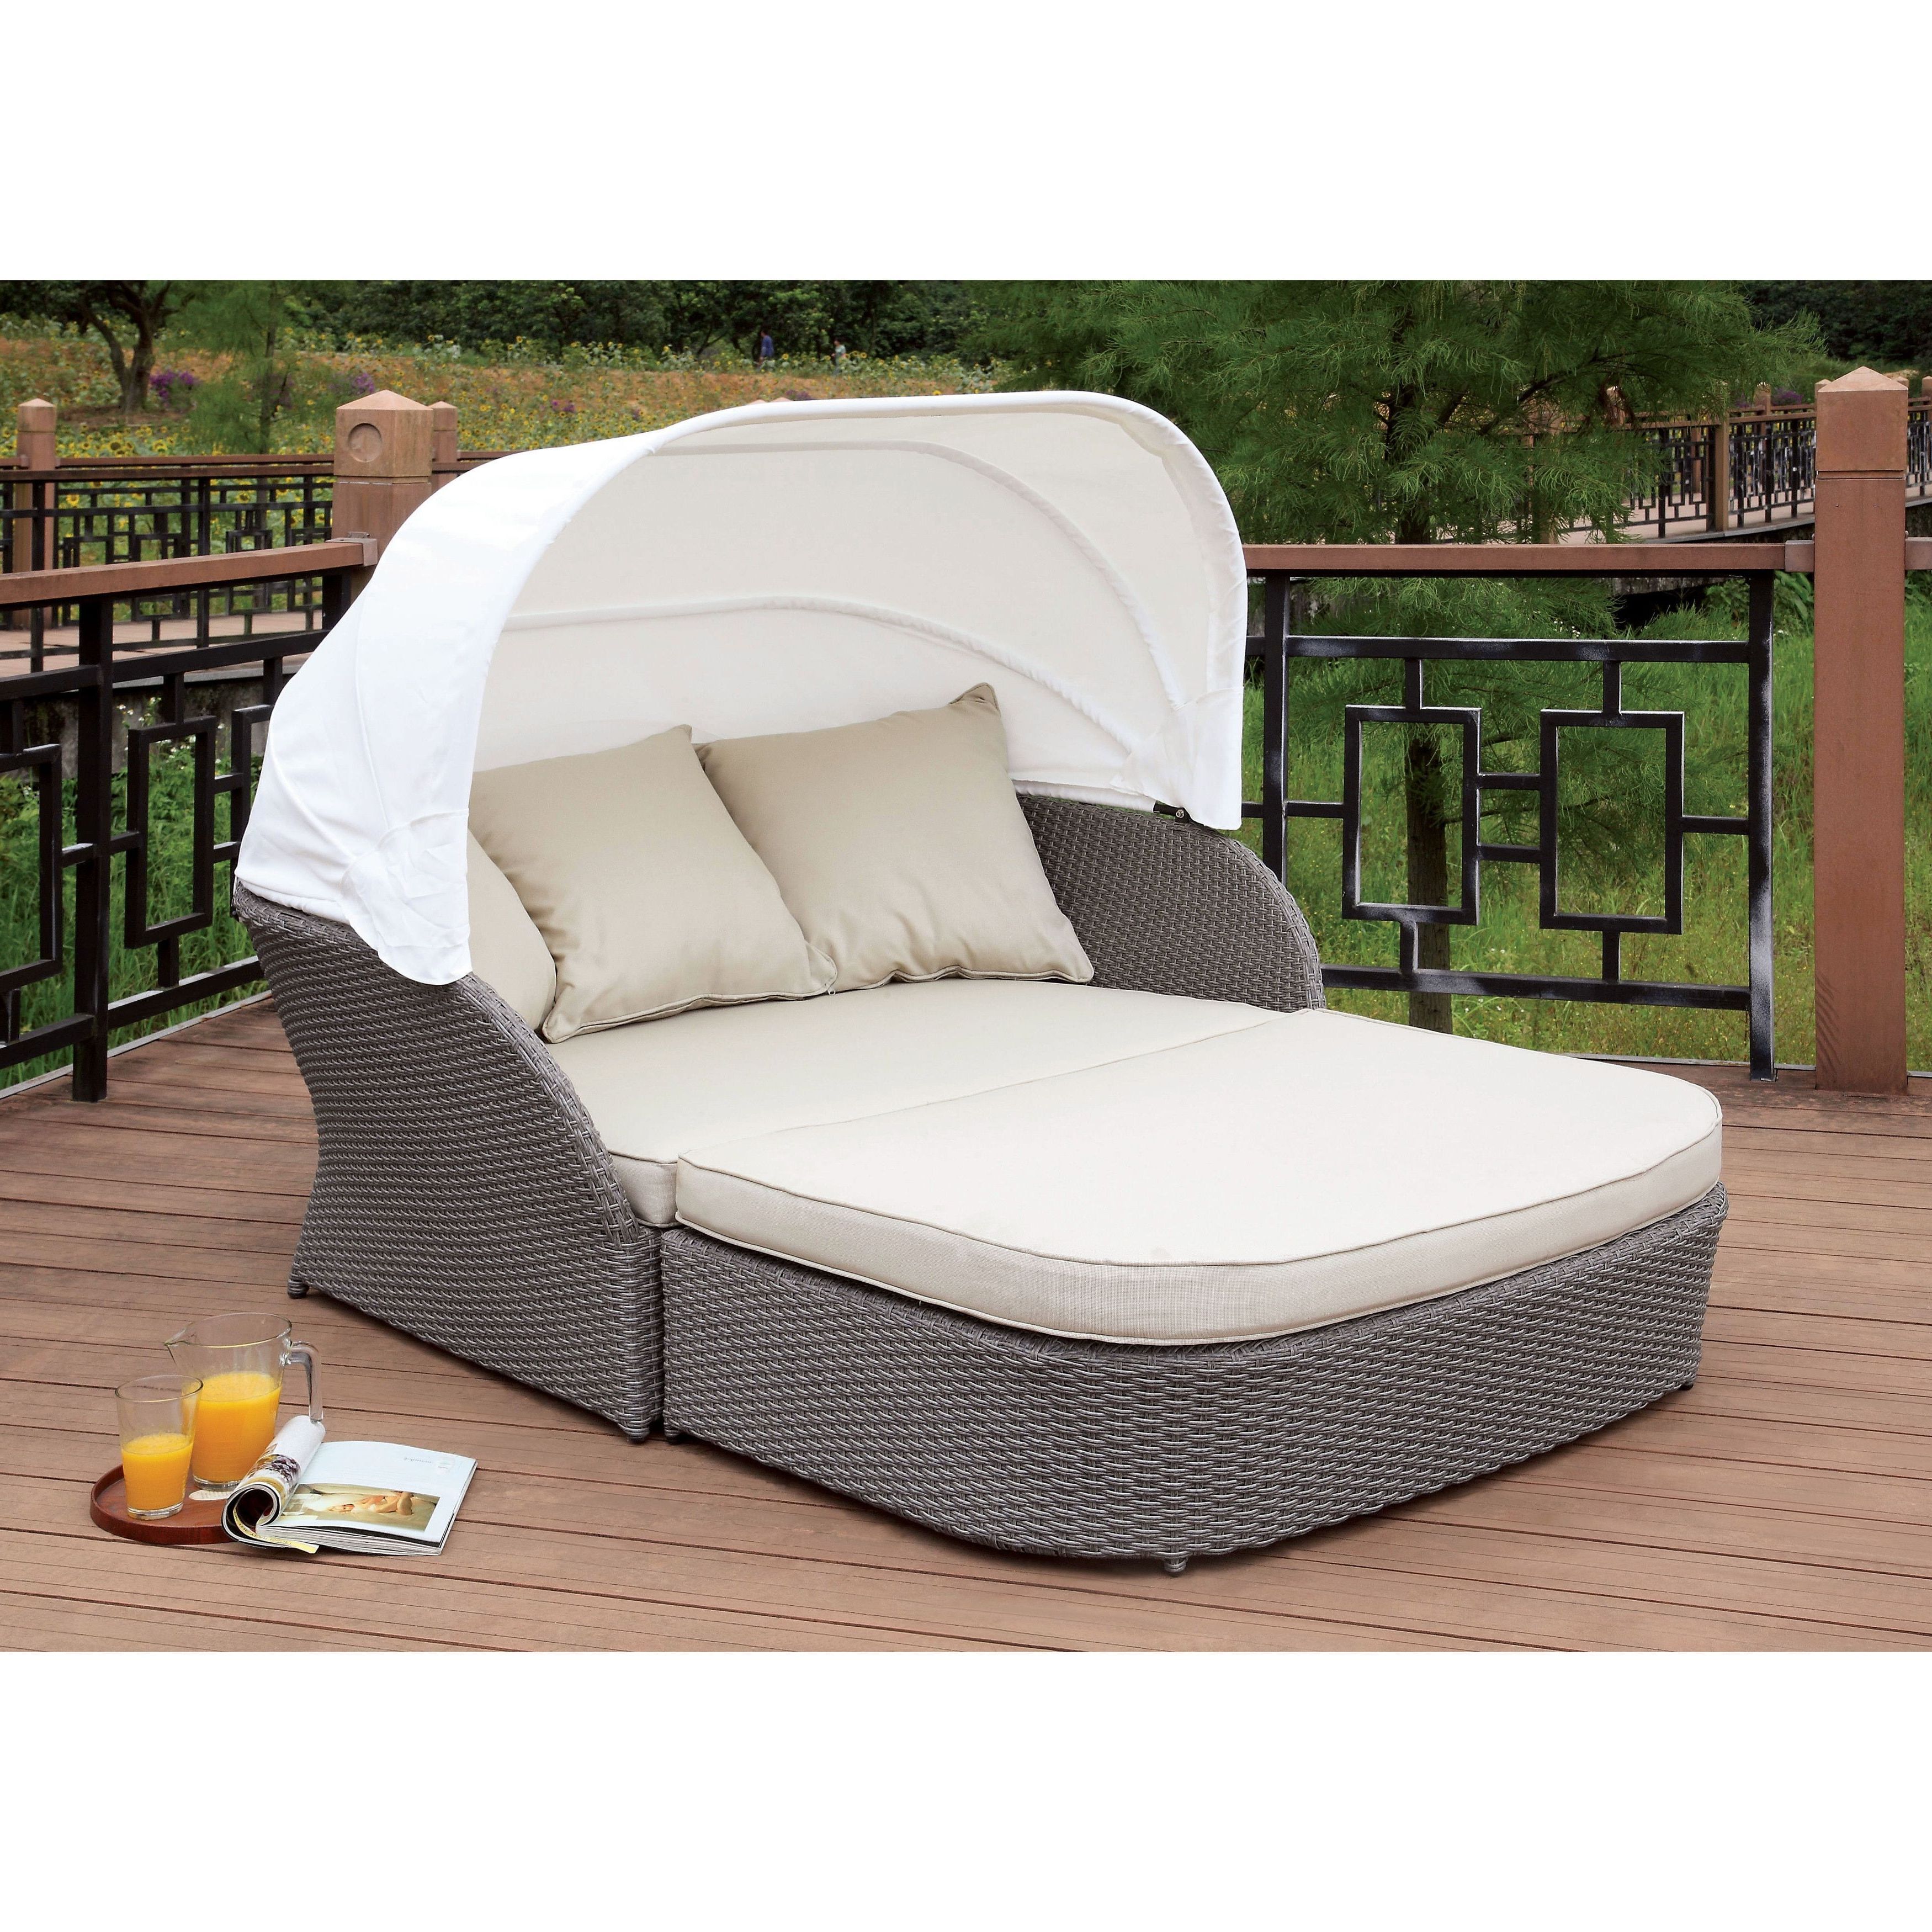 Best And Newest Harlow Patio Daybeds With Cushions In Viena Contemporary Grey Patio 2 Piece Canopy Bedfoa (View 10 of 20)